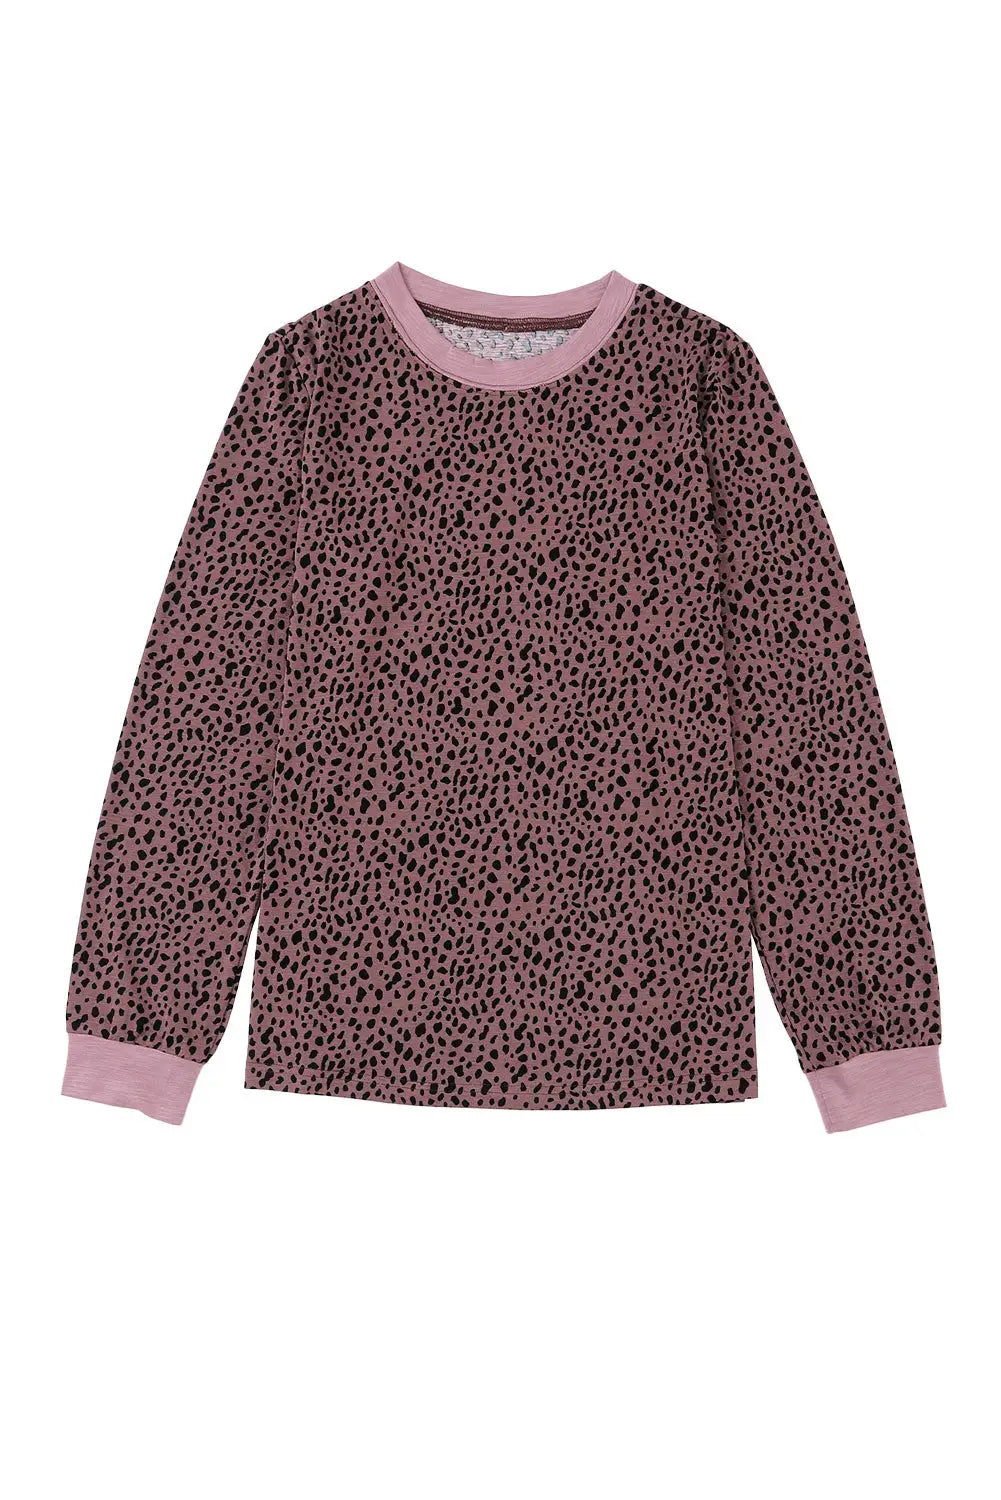 Animal Spotted Print Round Neck Long Sleeve Top-9